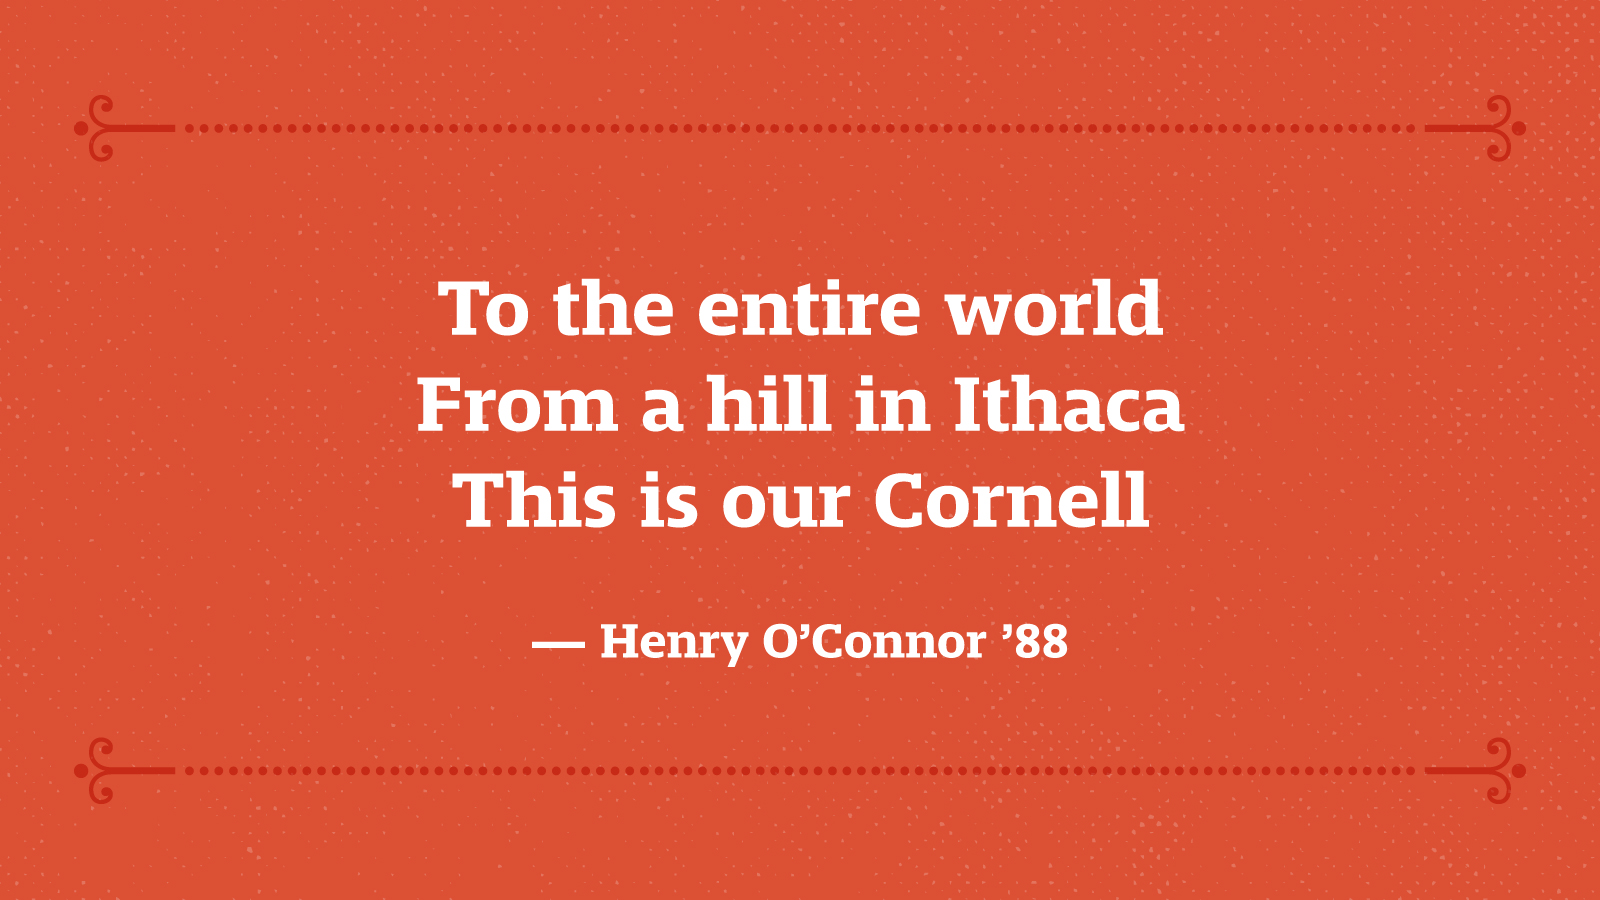 To the entire world From a hill in Ithaca This is our Cornell — Henry O’Connor ’88